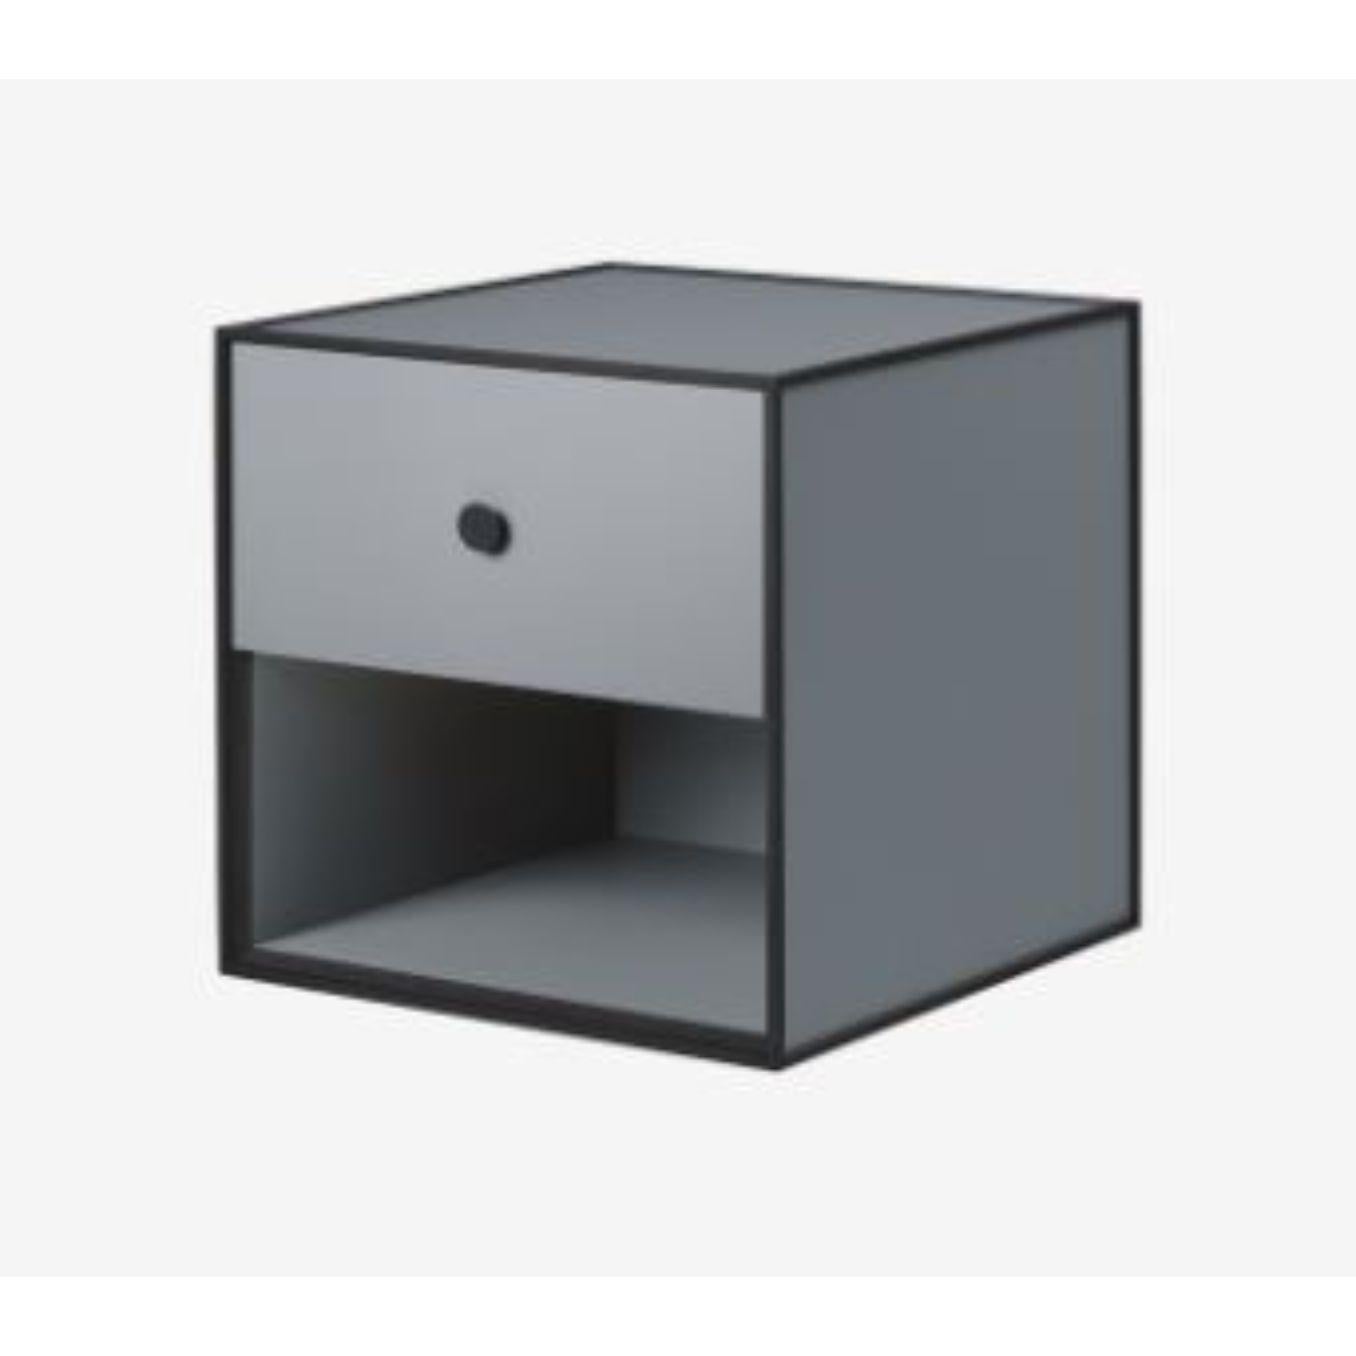 35 dark grey frame box with 1 drawer by Lassen
Dimensions: w 35 x d 35 x h 35 cm 
Materials: Finér, Melamin, Melamin, Melamine, Metal, Veneer,
Also available in different colors and dimensions. 

By Lassen is a Danish design brand focused on